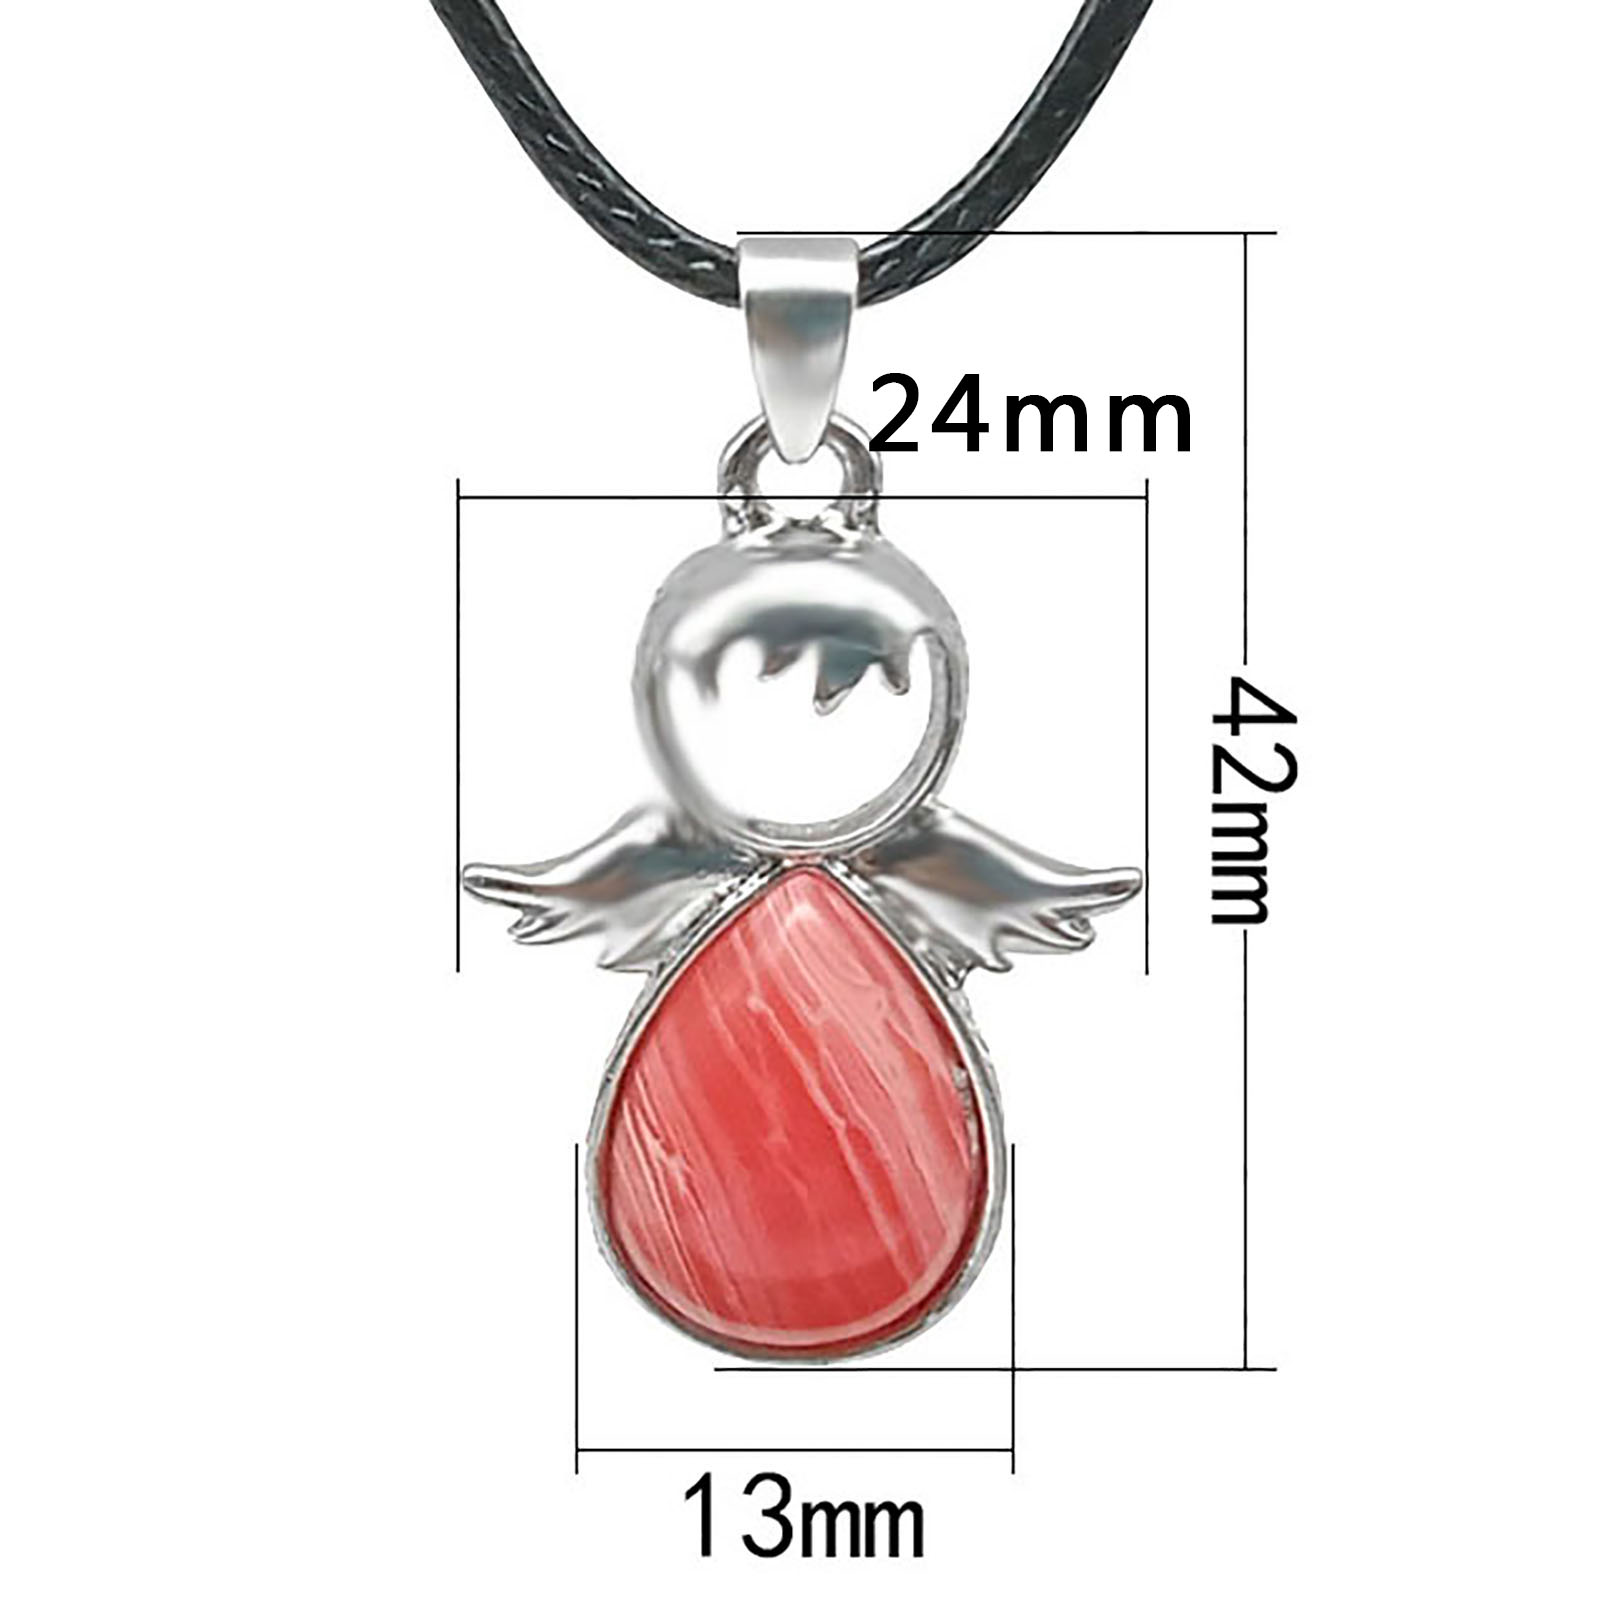 1:The length of the pendant is about 24mm, the height is about 36mm (excluding the buckle), and the length of the chain is about 50cm